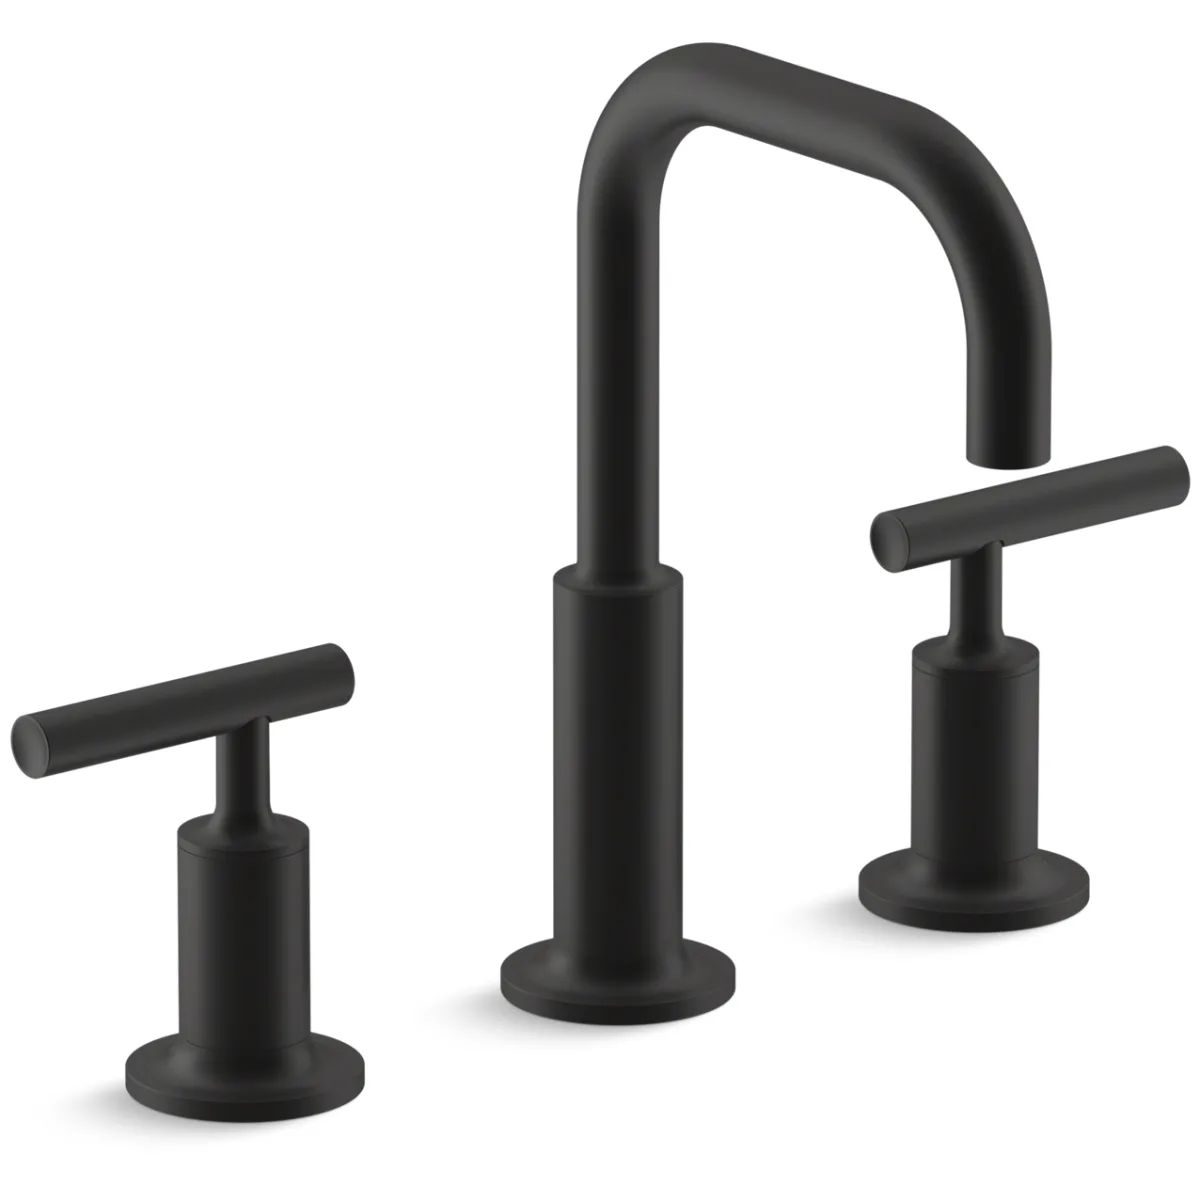 Purist Widespread Bathroom Faucet with Ultra-Glide Valve Technology - Includes Metal Pop-Up Drain... | Build.com, Inc.